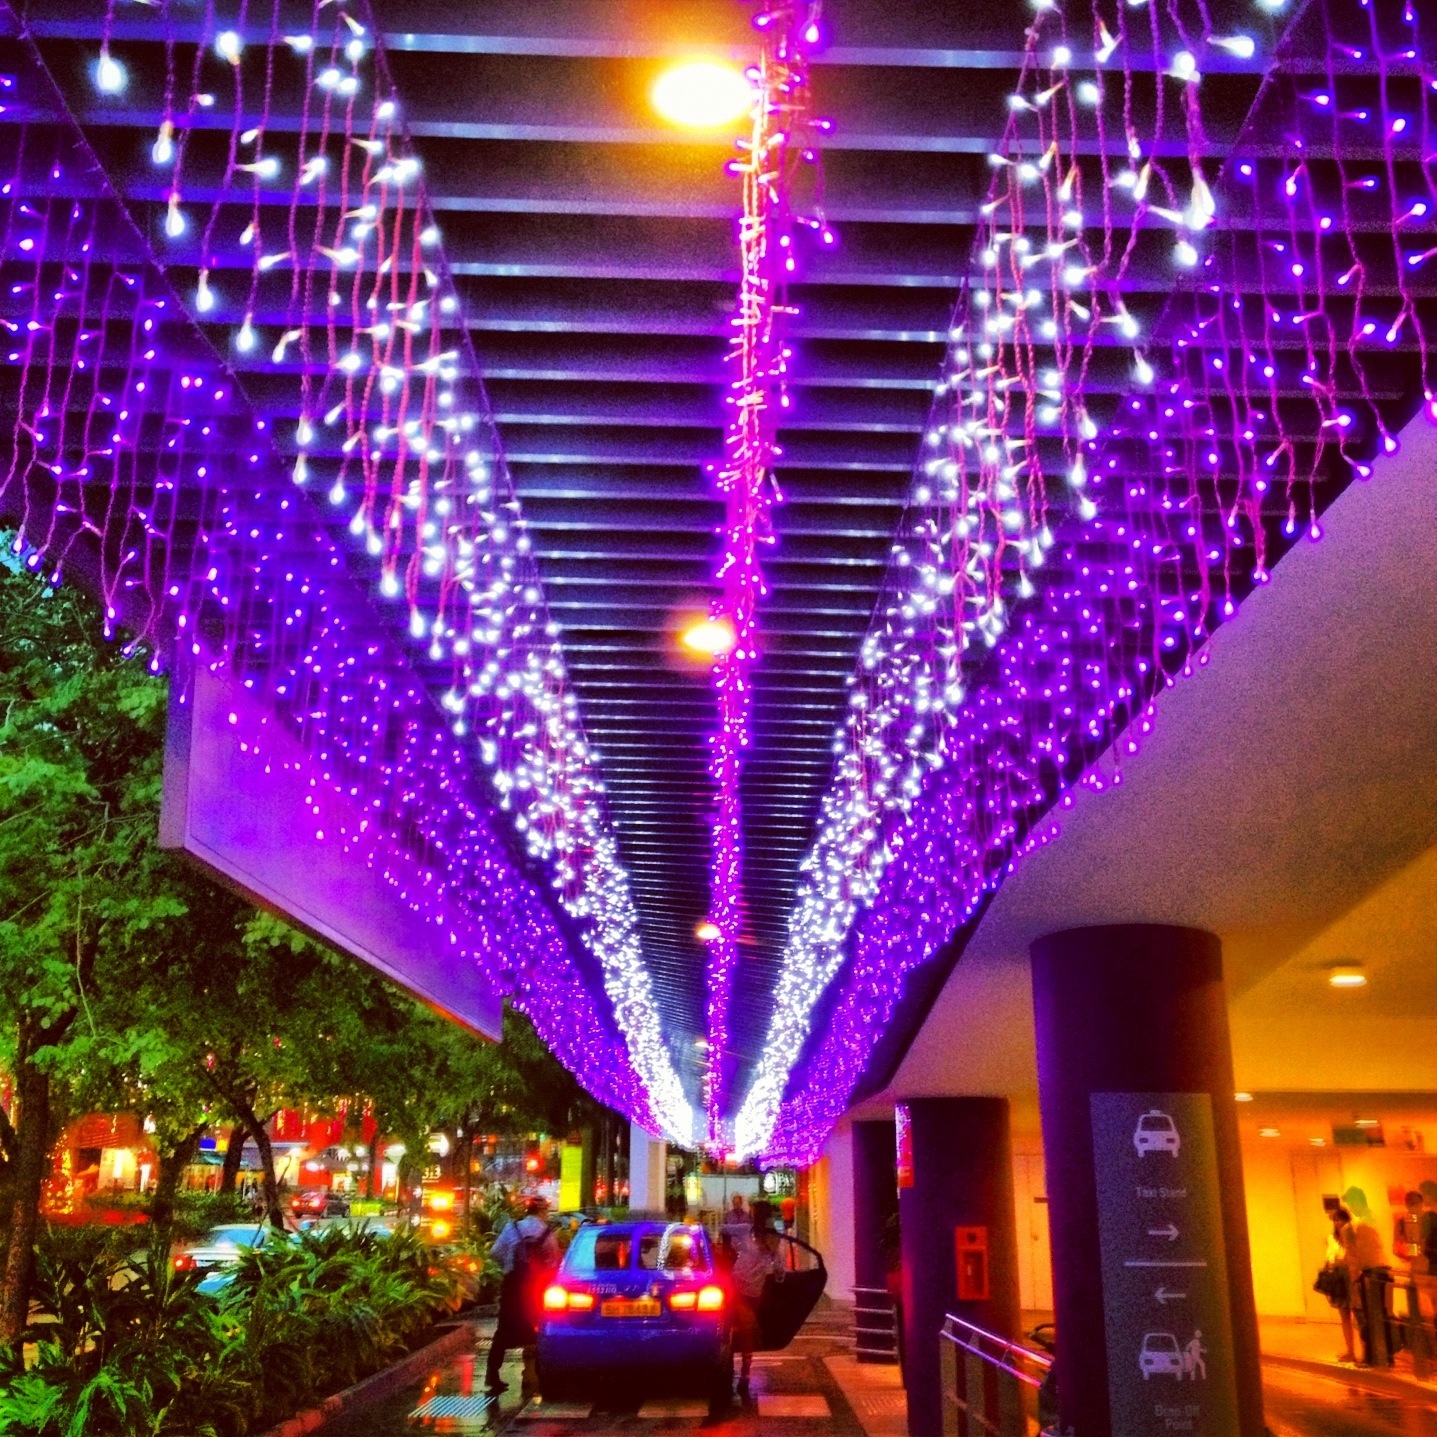 a city street filled with lots of purple lights